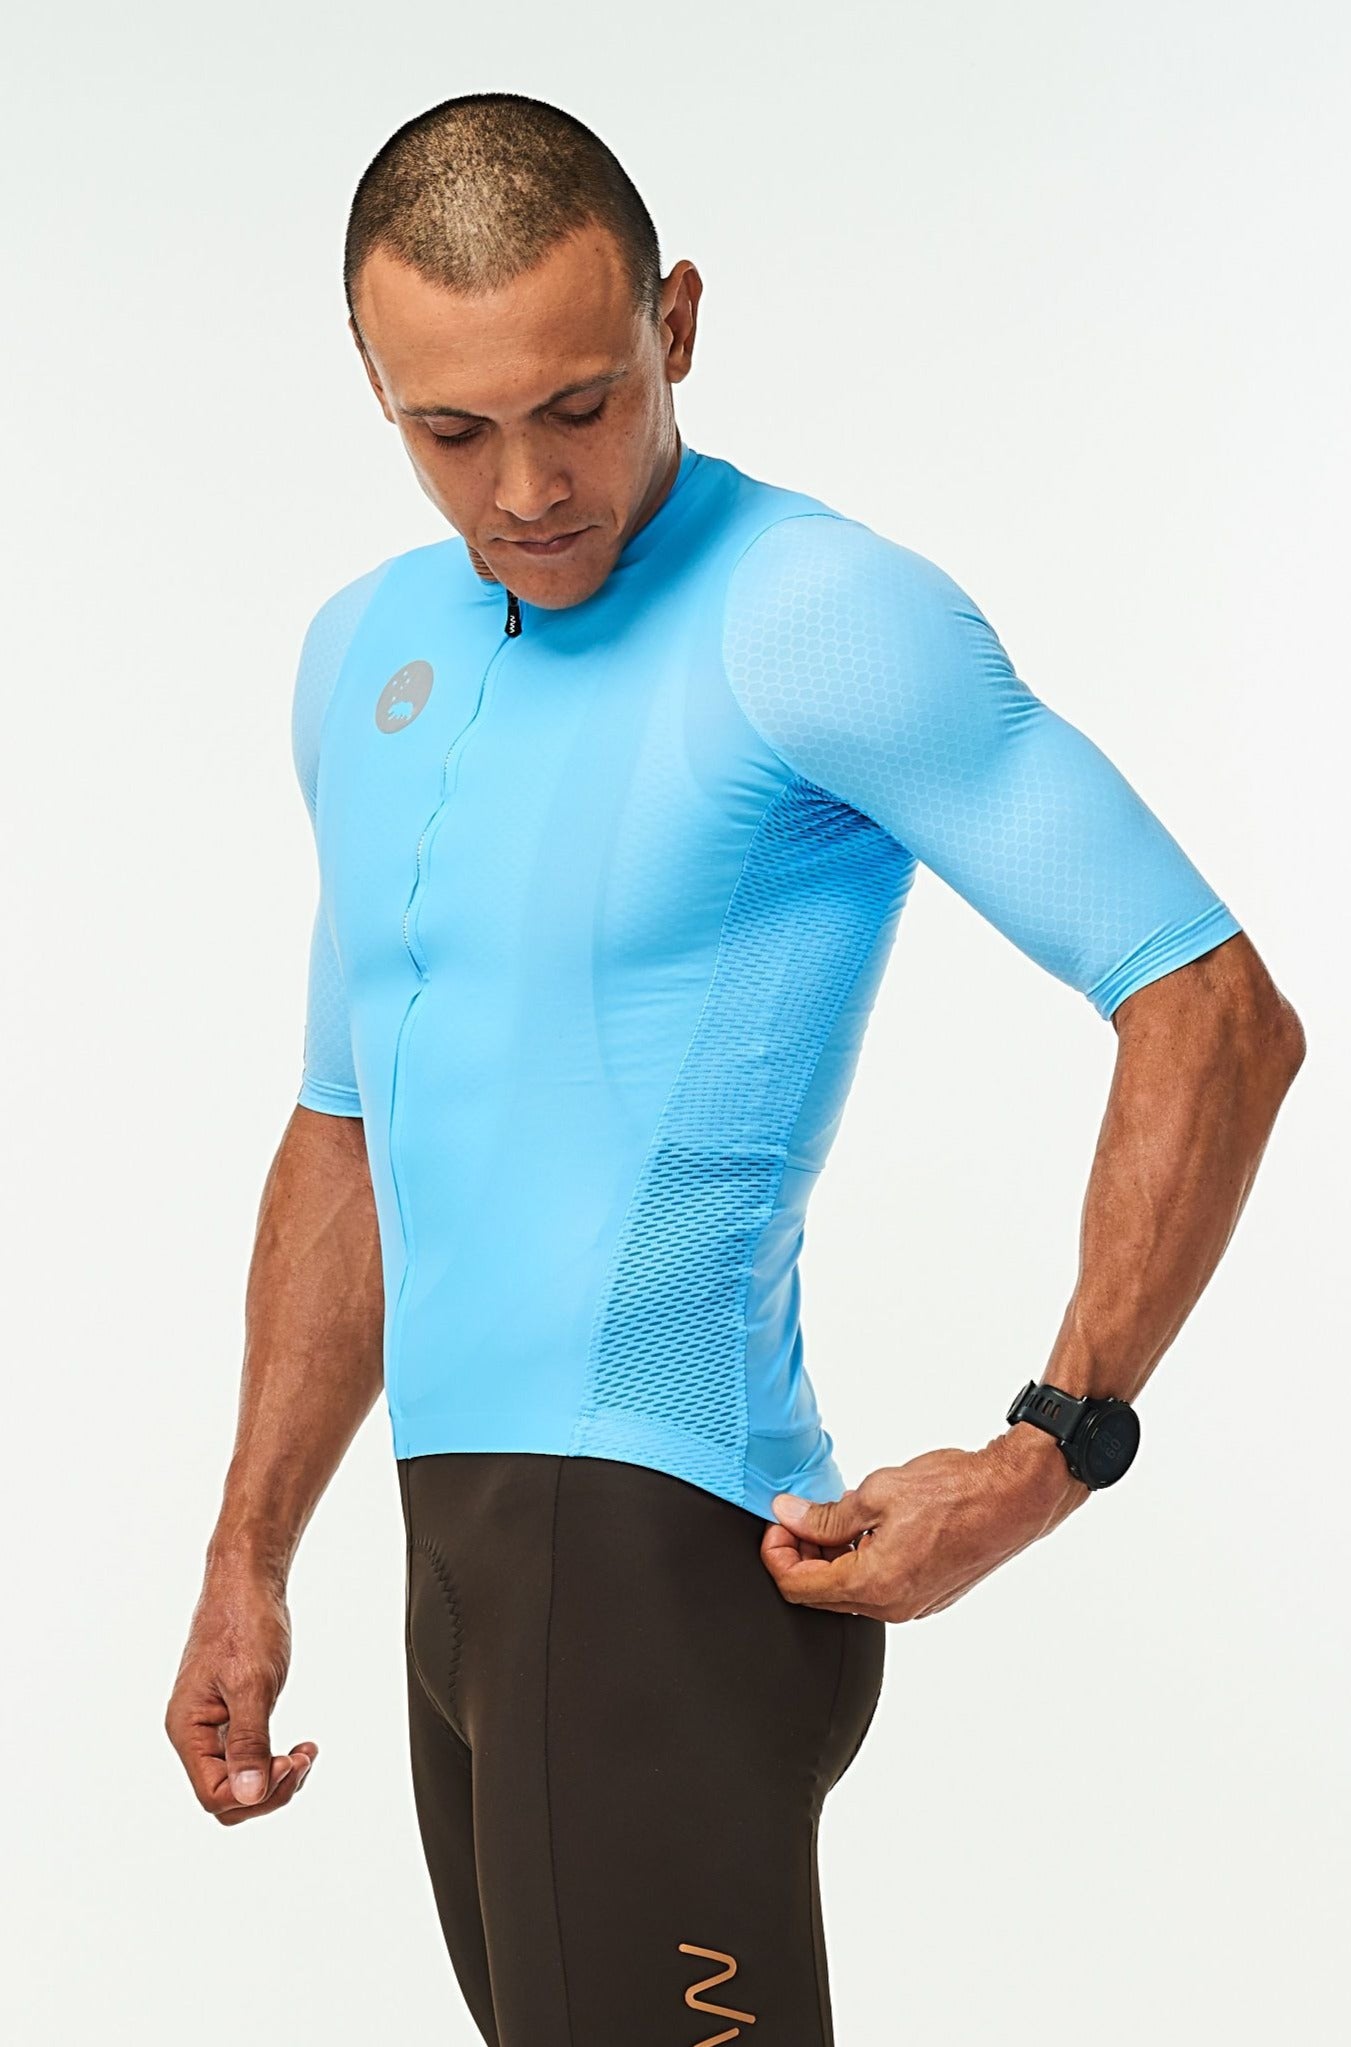 Left side of men's Hex Racer Jersey. Blue cycling jersey with mesh panels for ventilation.